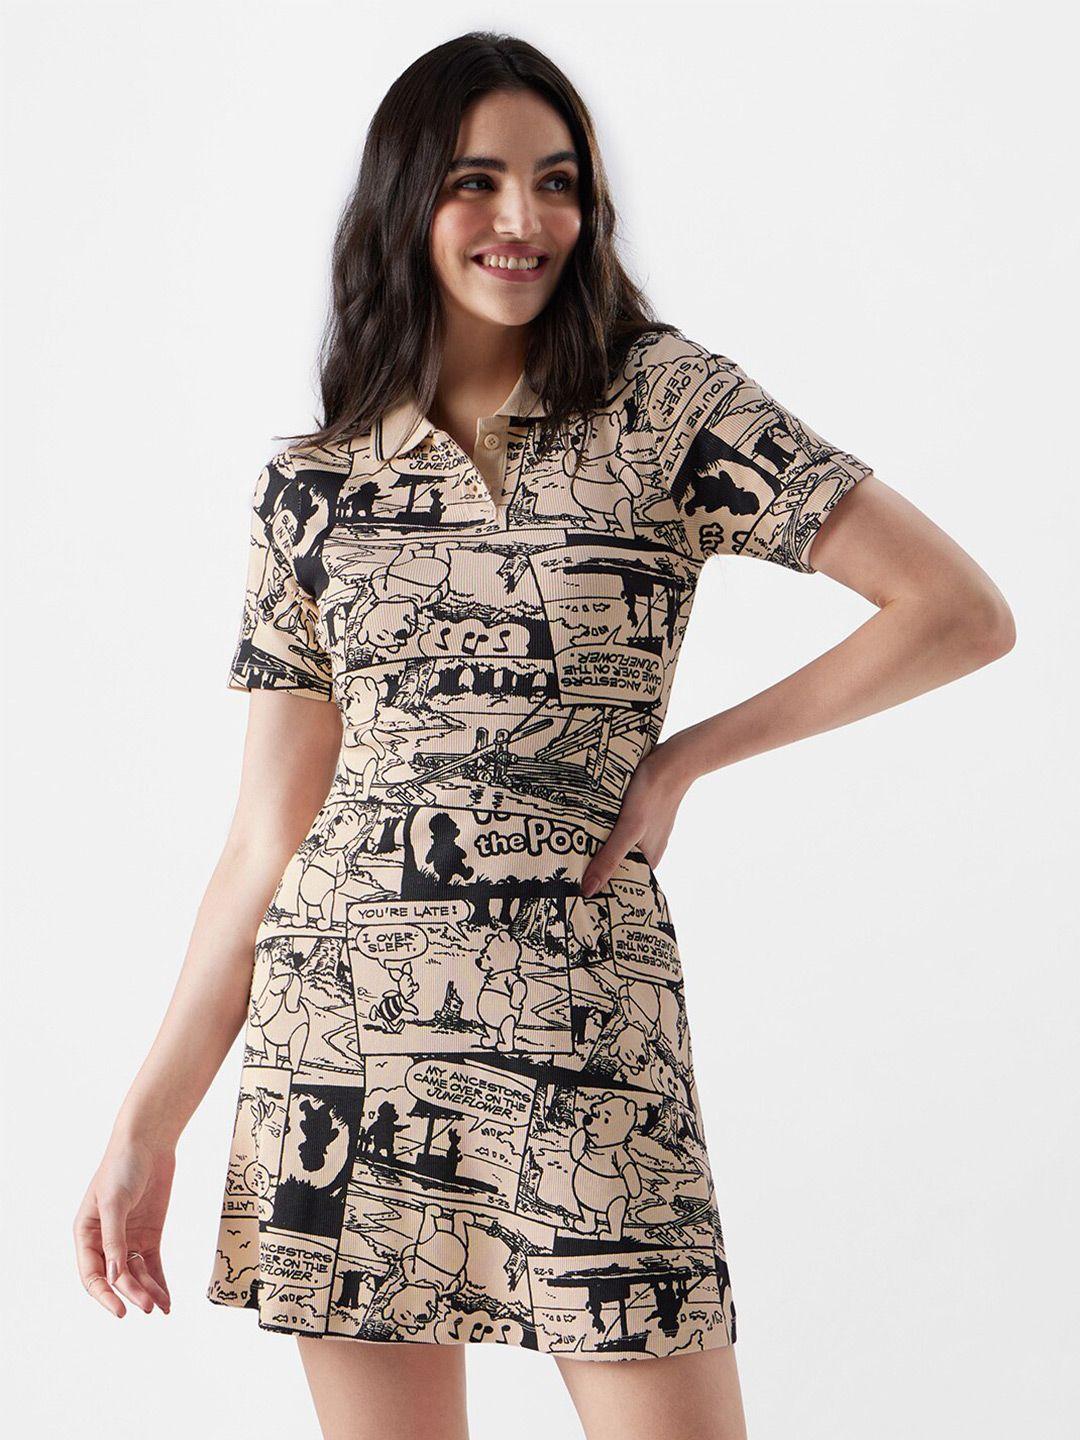 the souled store abstract print shirt styled cotton dress